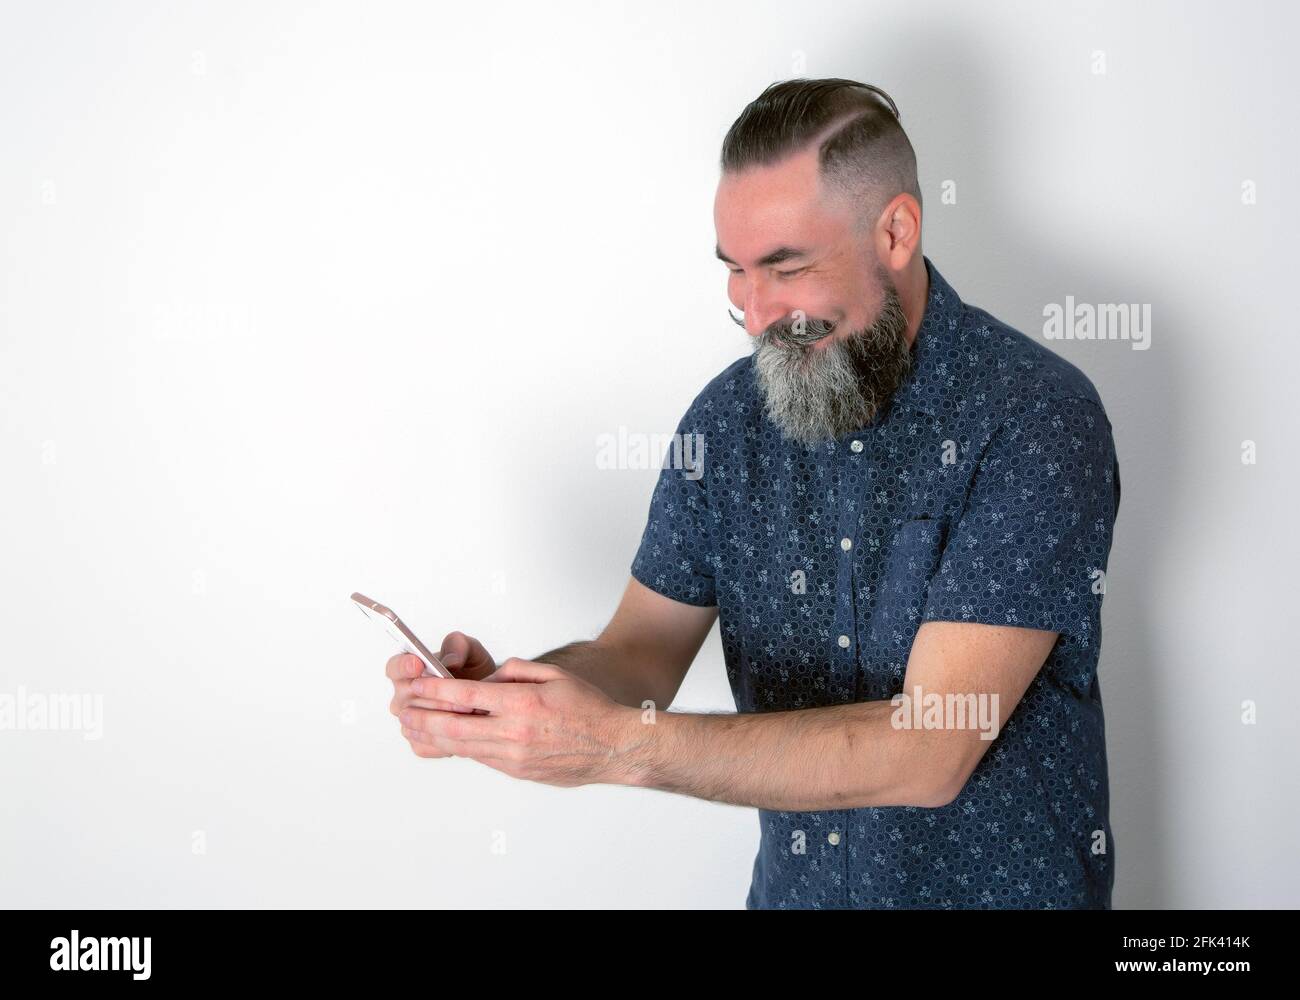 Caucasian 40 45 Year Old Bearded Hipster Looking At His Mobile Phone With A Happy And Laughing